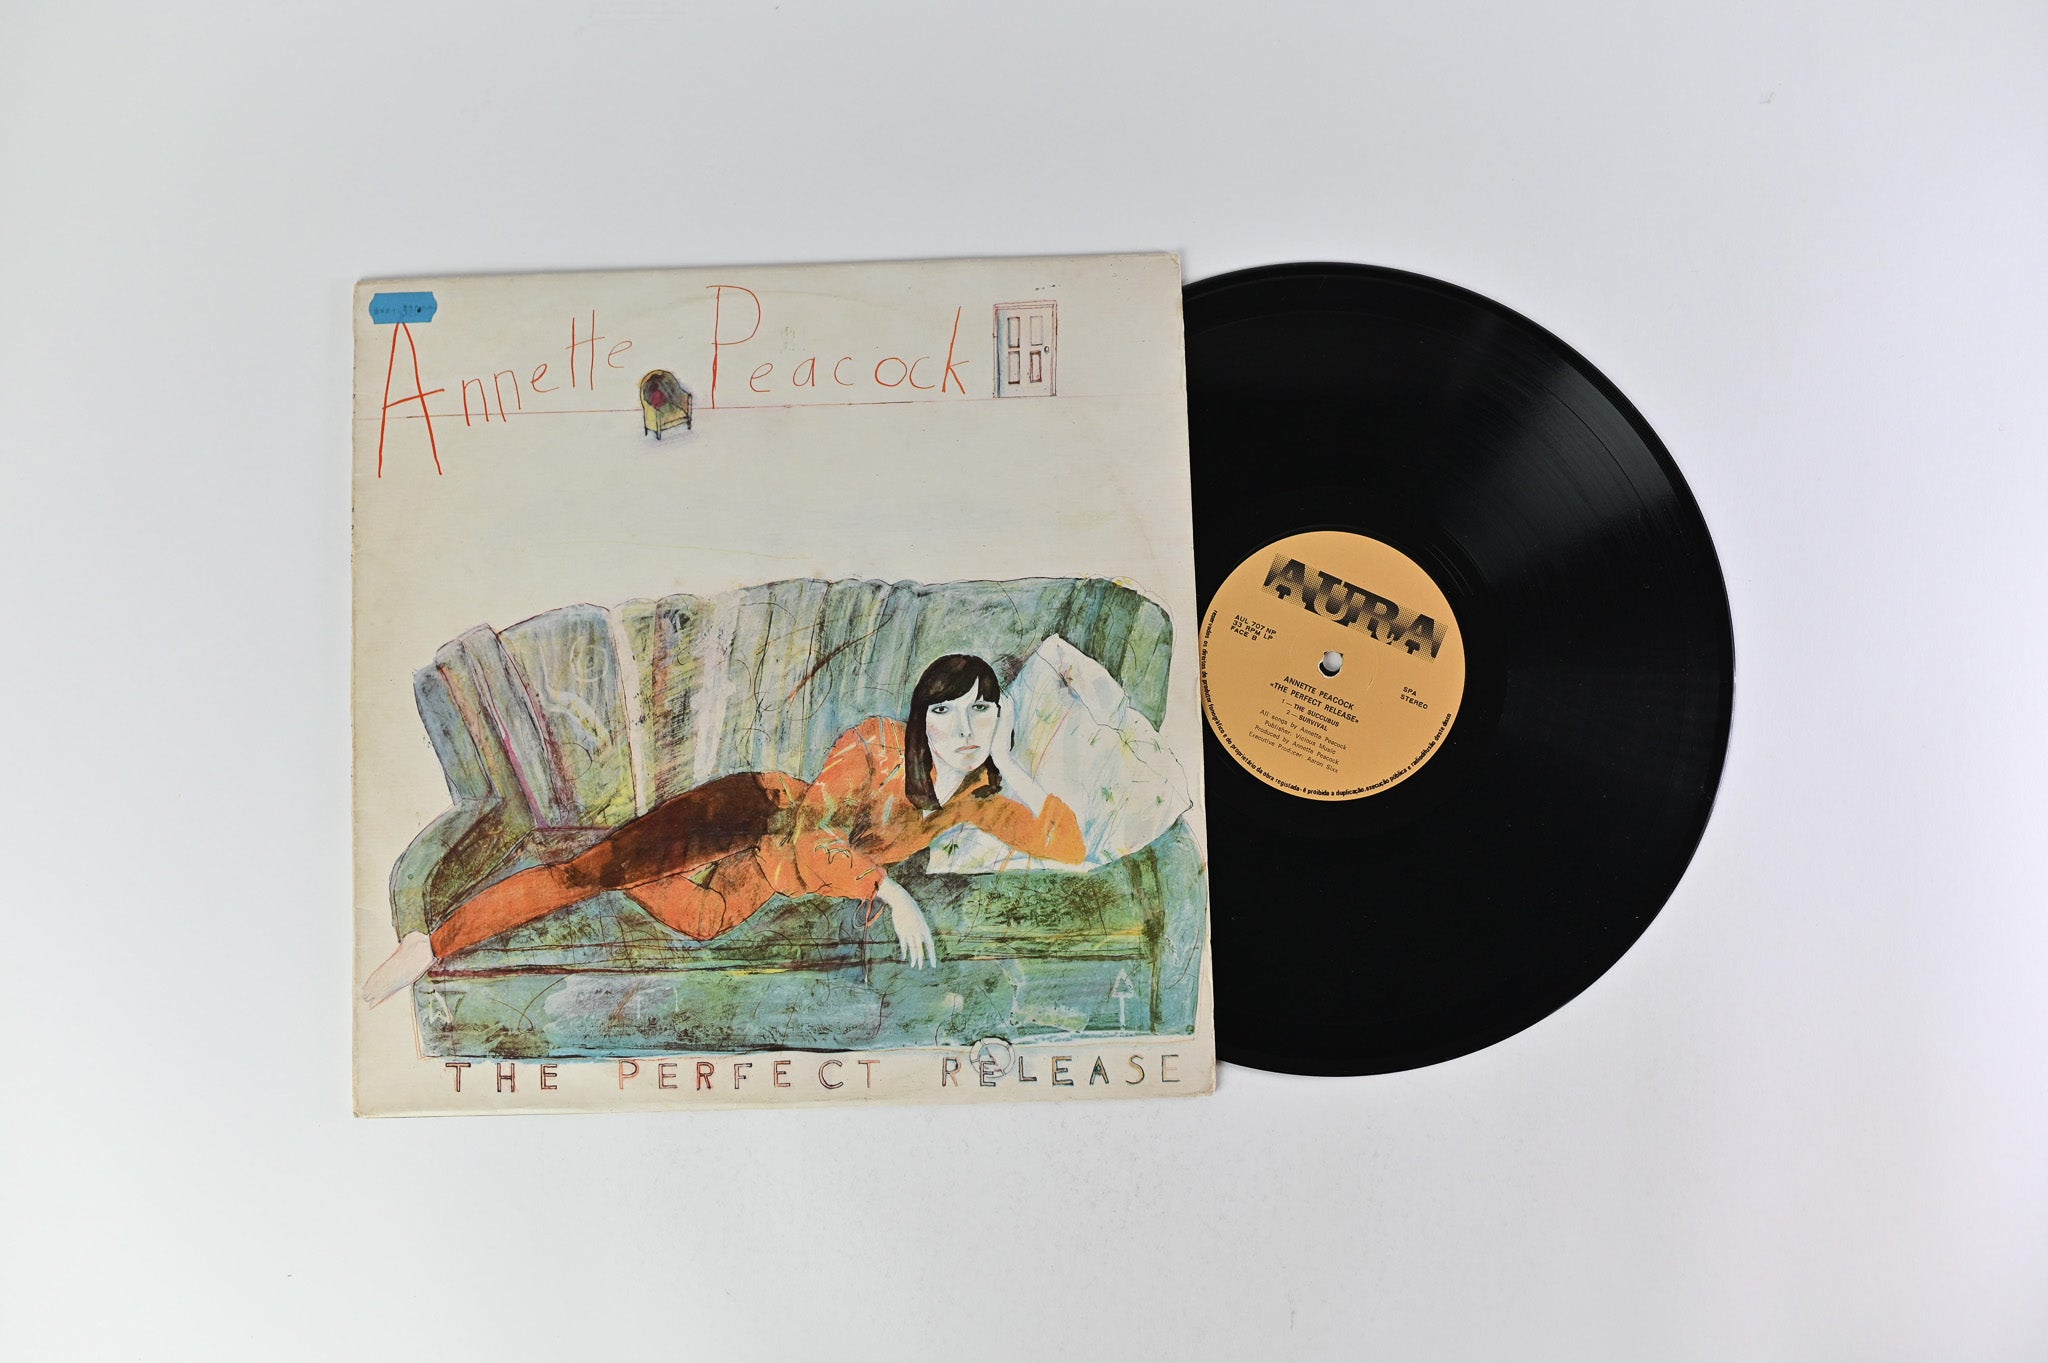 Annette Peacock - The Perfect Release on Aura Portugese Pressing